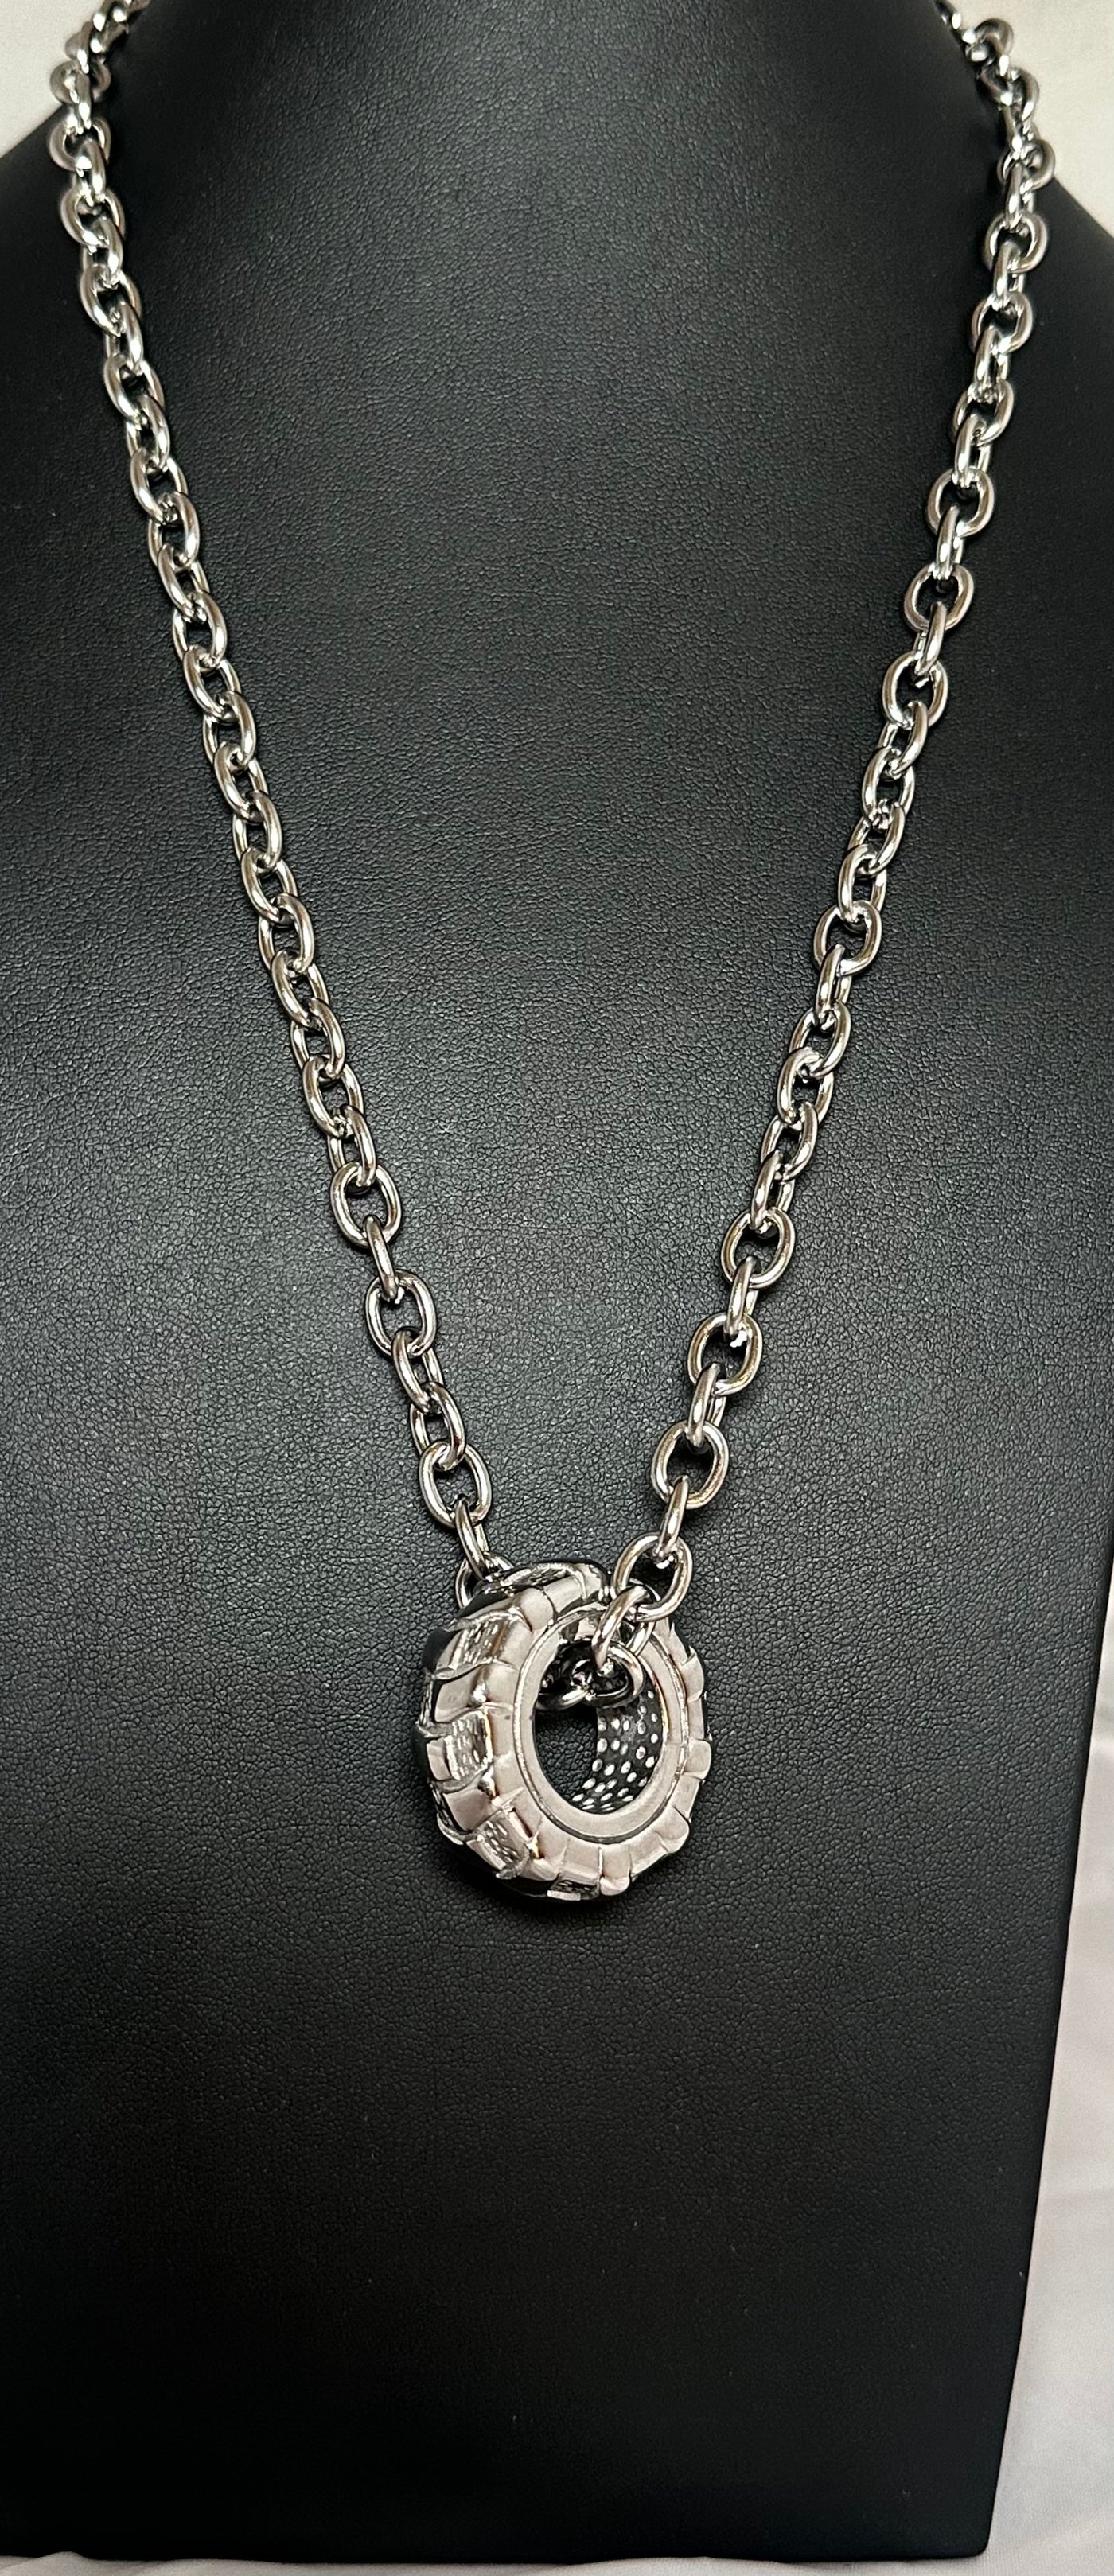 CrossFit Tire Necklace